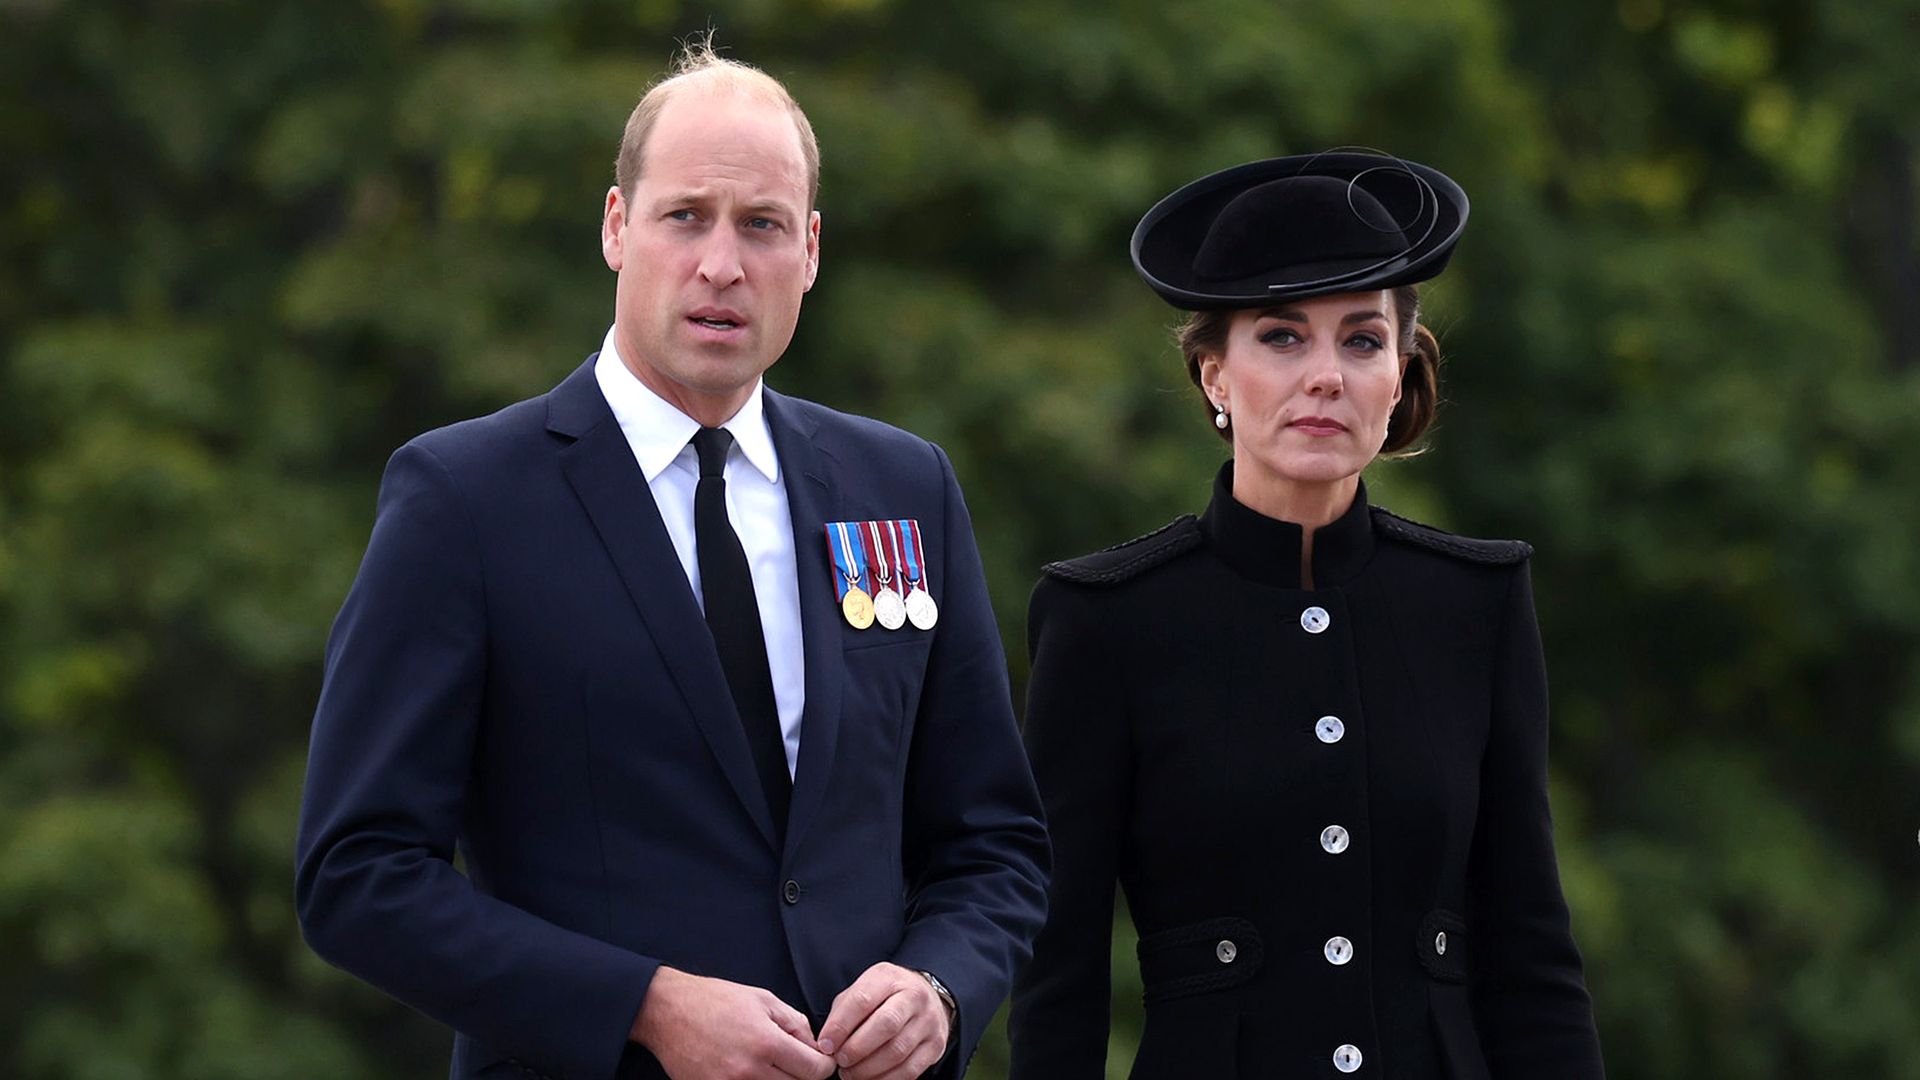 Prince William in suit and Kate Middleton in black dress